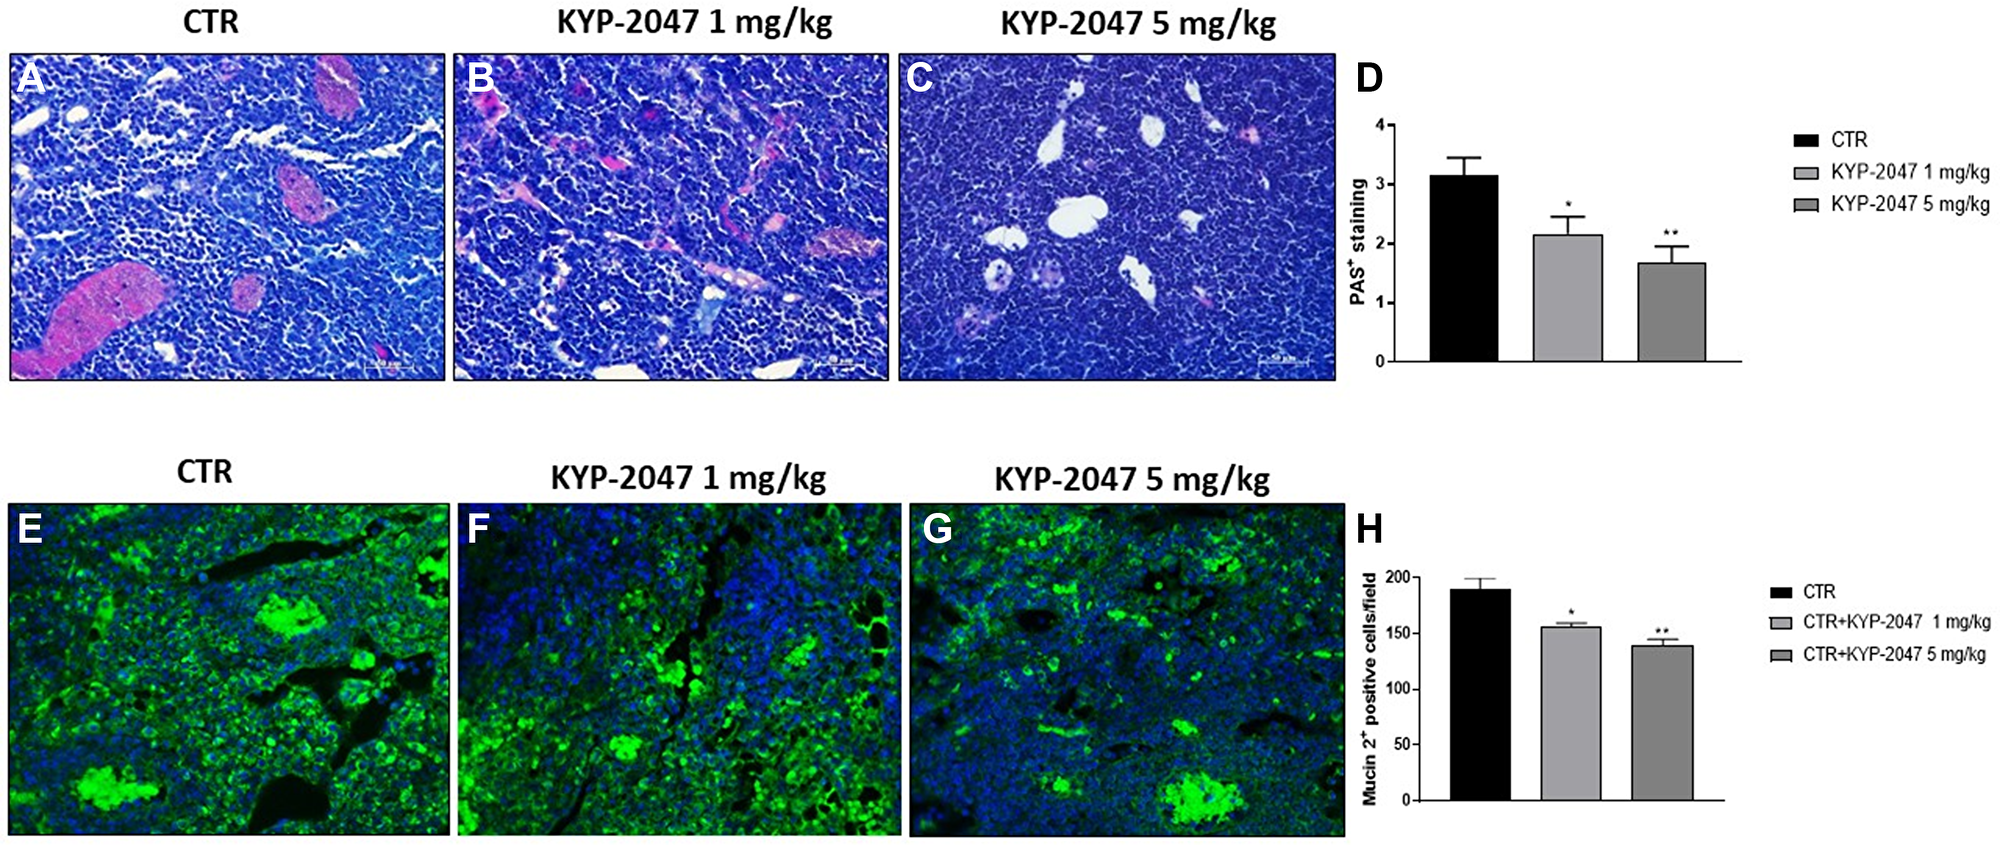 Effect of KYP-2047 on mucosal content.